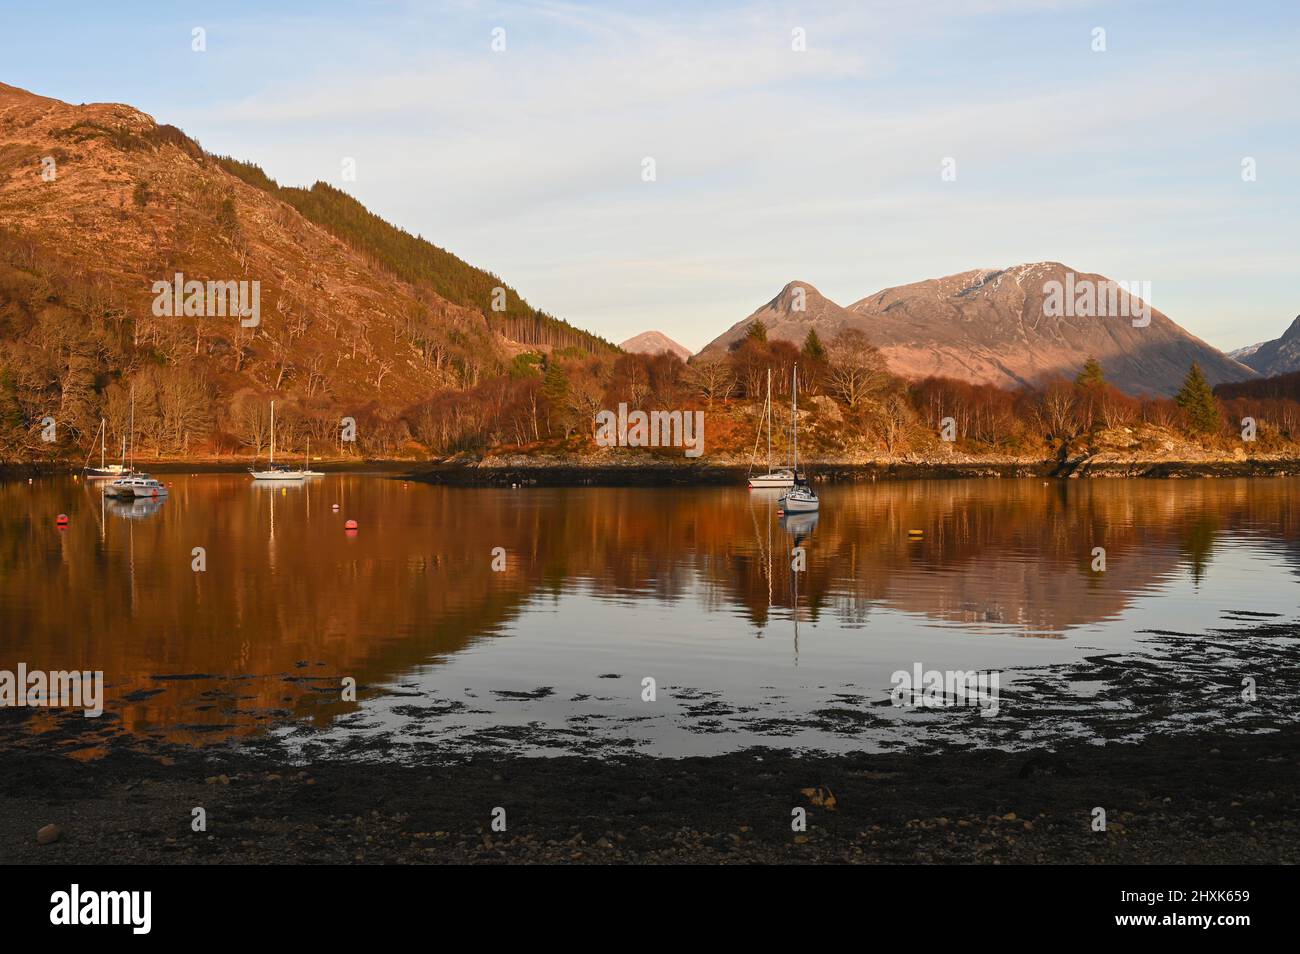 Loch Leven from North Ballachulish in Scottish Highlands. View of mountains, boats and reflections in water. Stock Photo